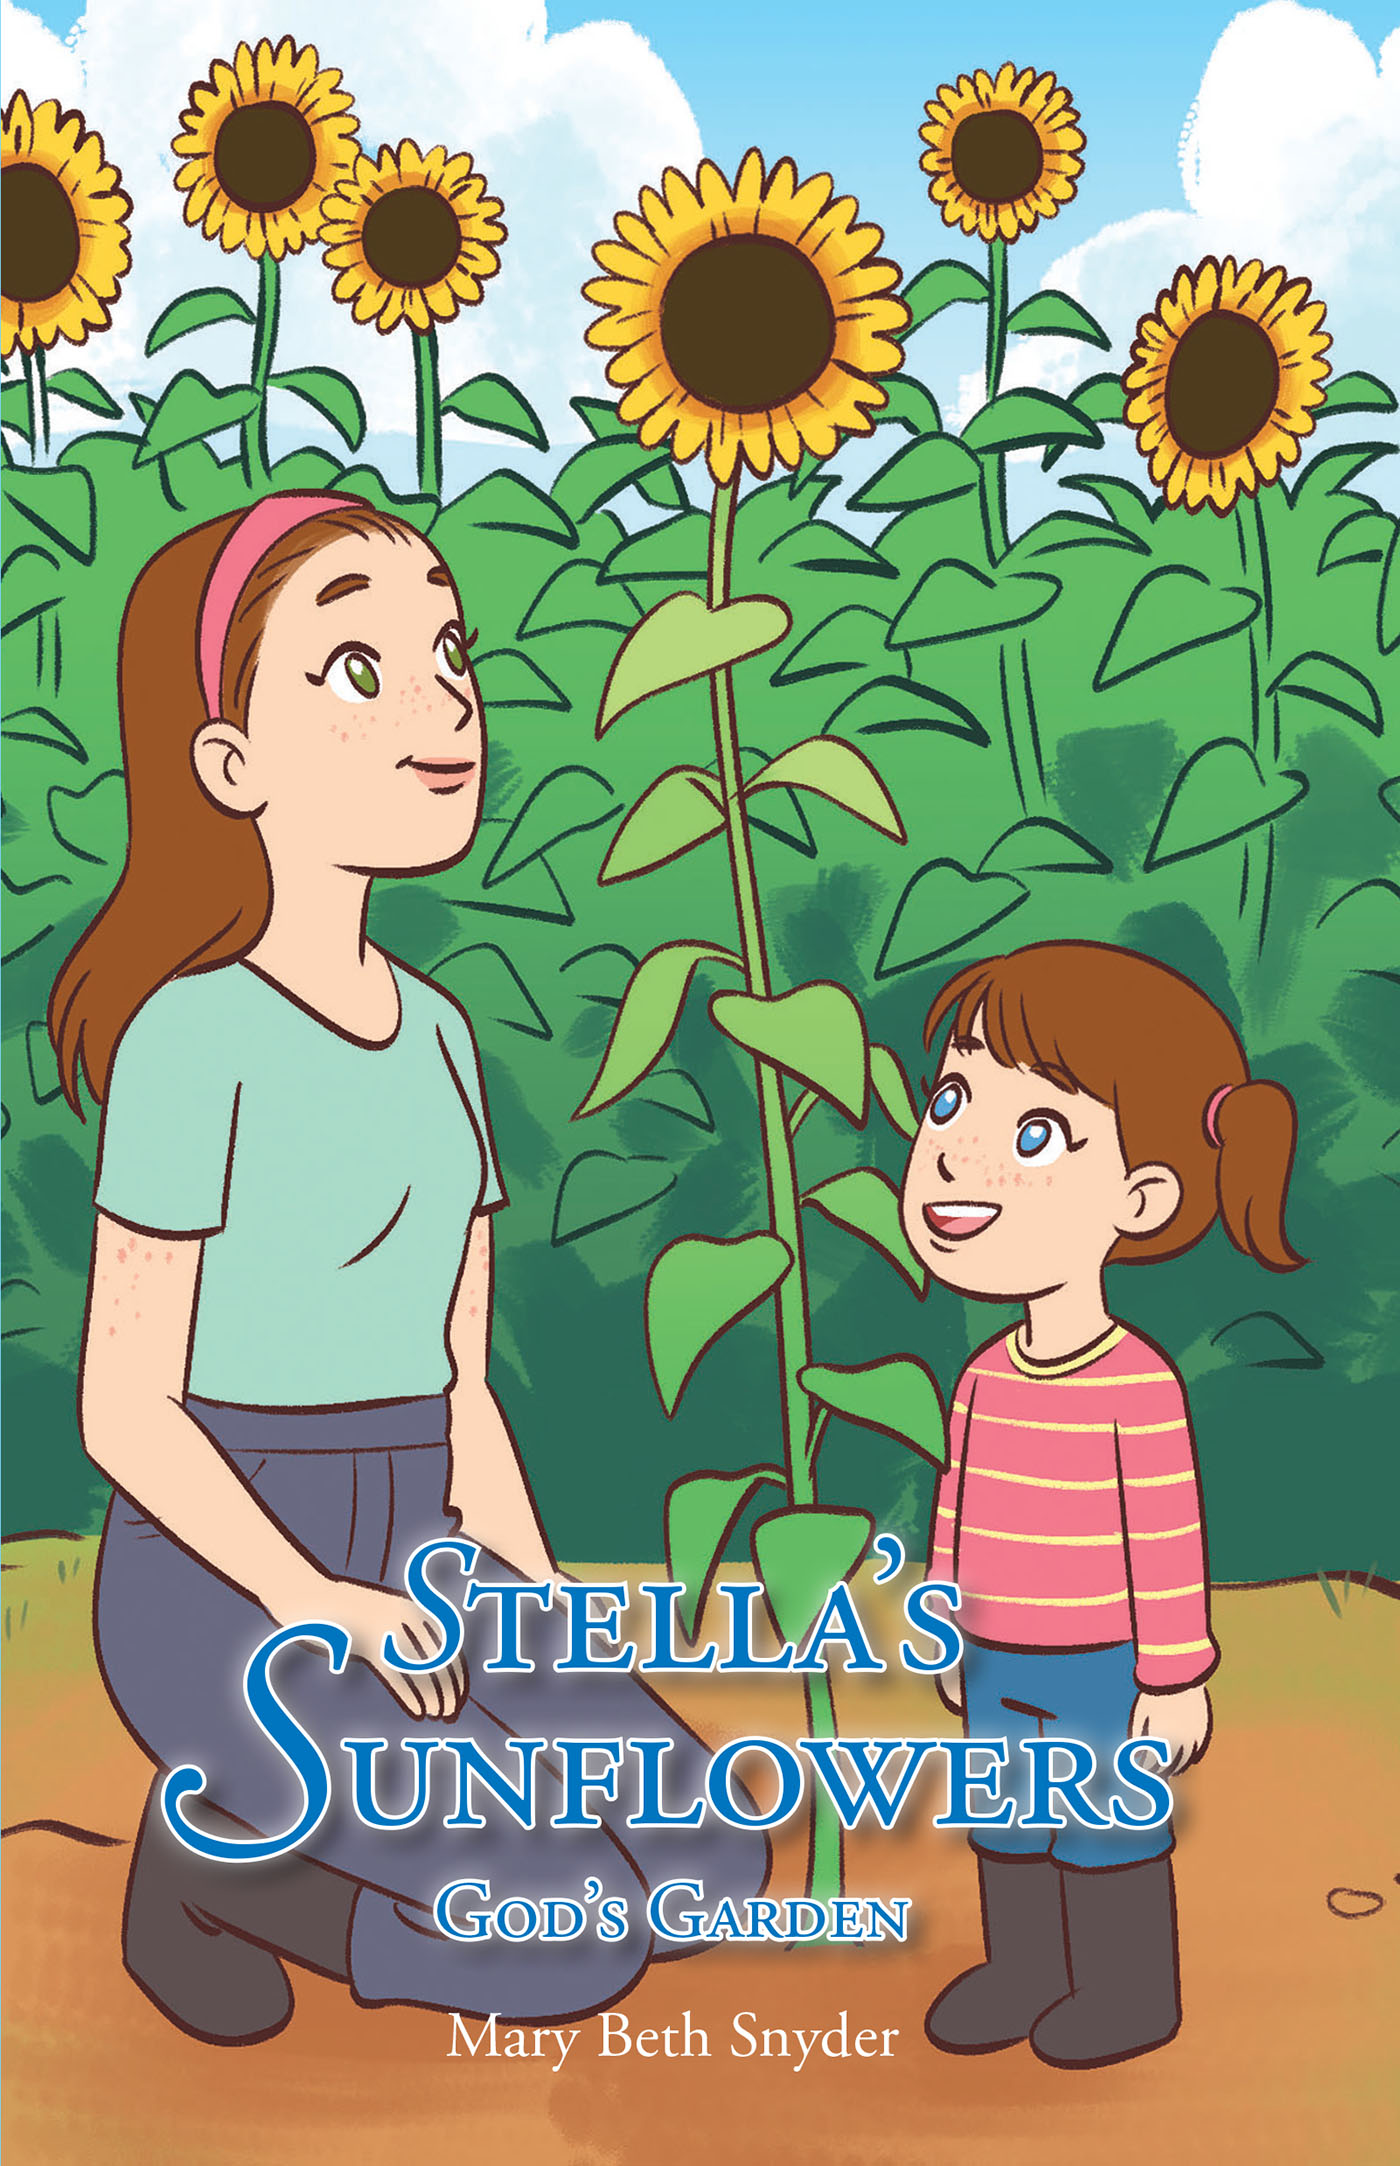 Mary Beth Snyder’s Newly Released "Stella’s Sunflowers: God’s Garden" is a Celebration of God’s Creation and the Beauty Found Within Even the Simplest Flower